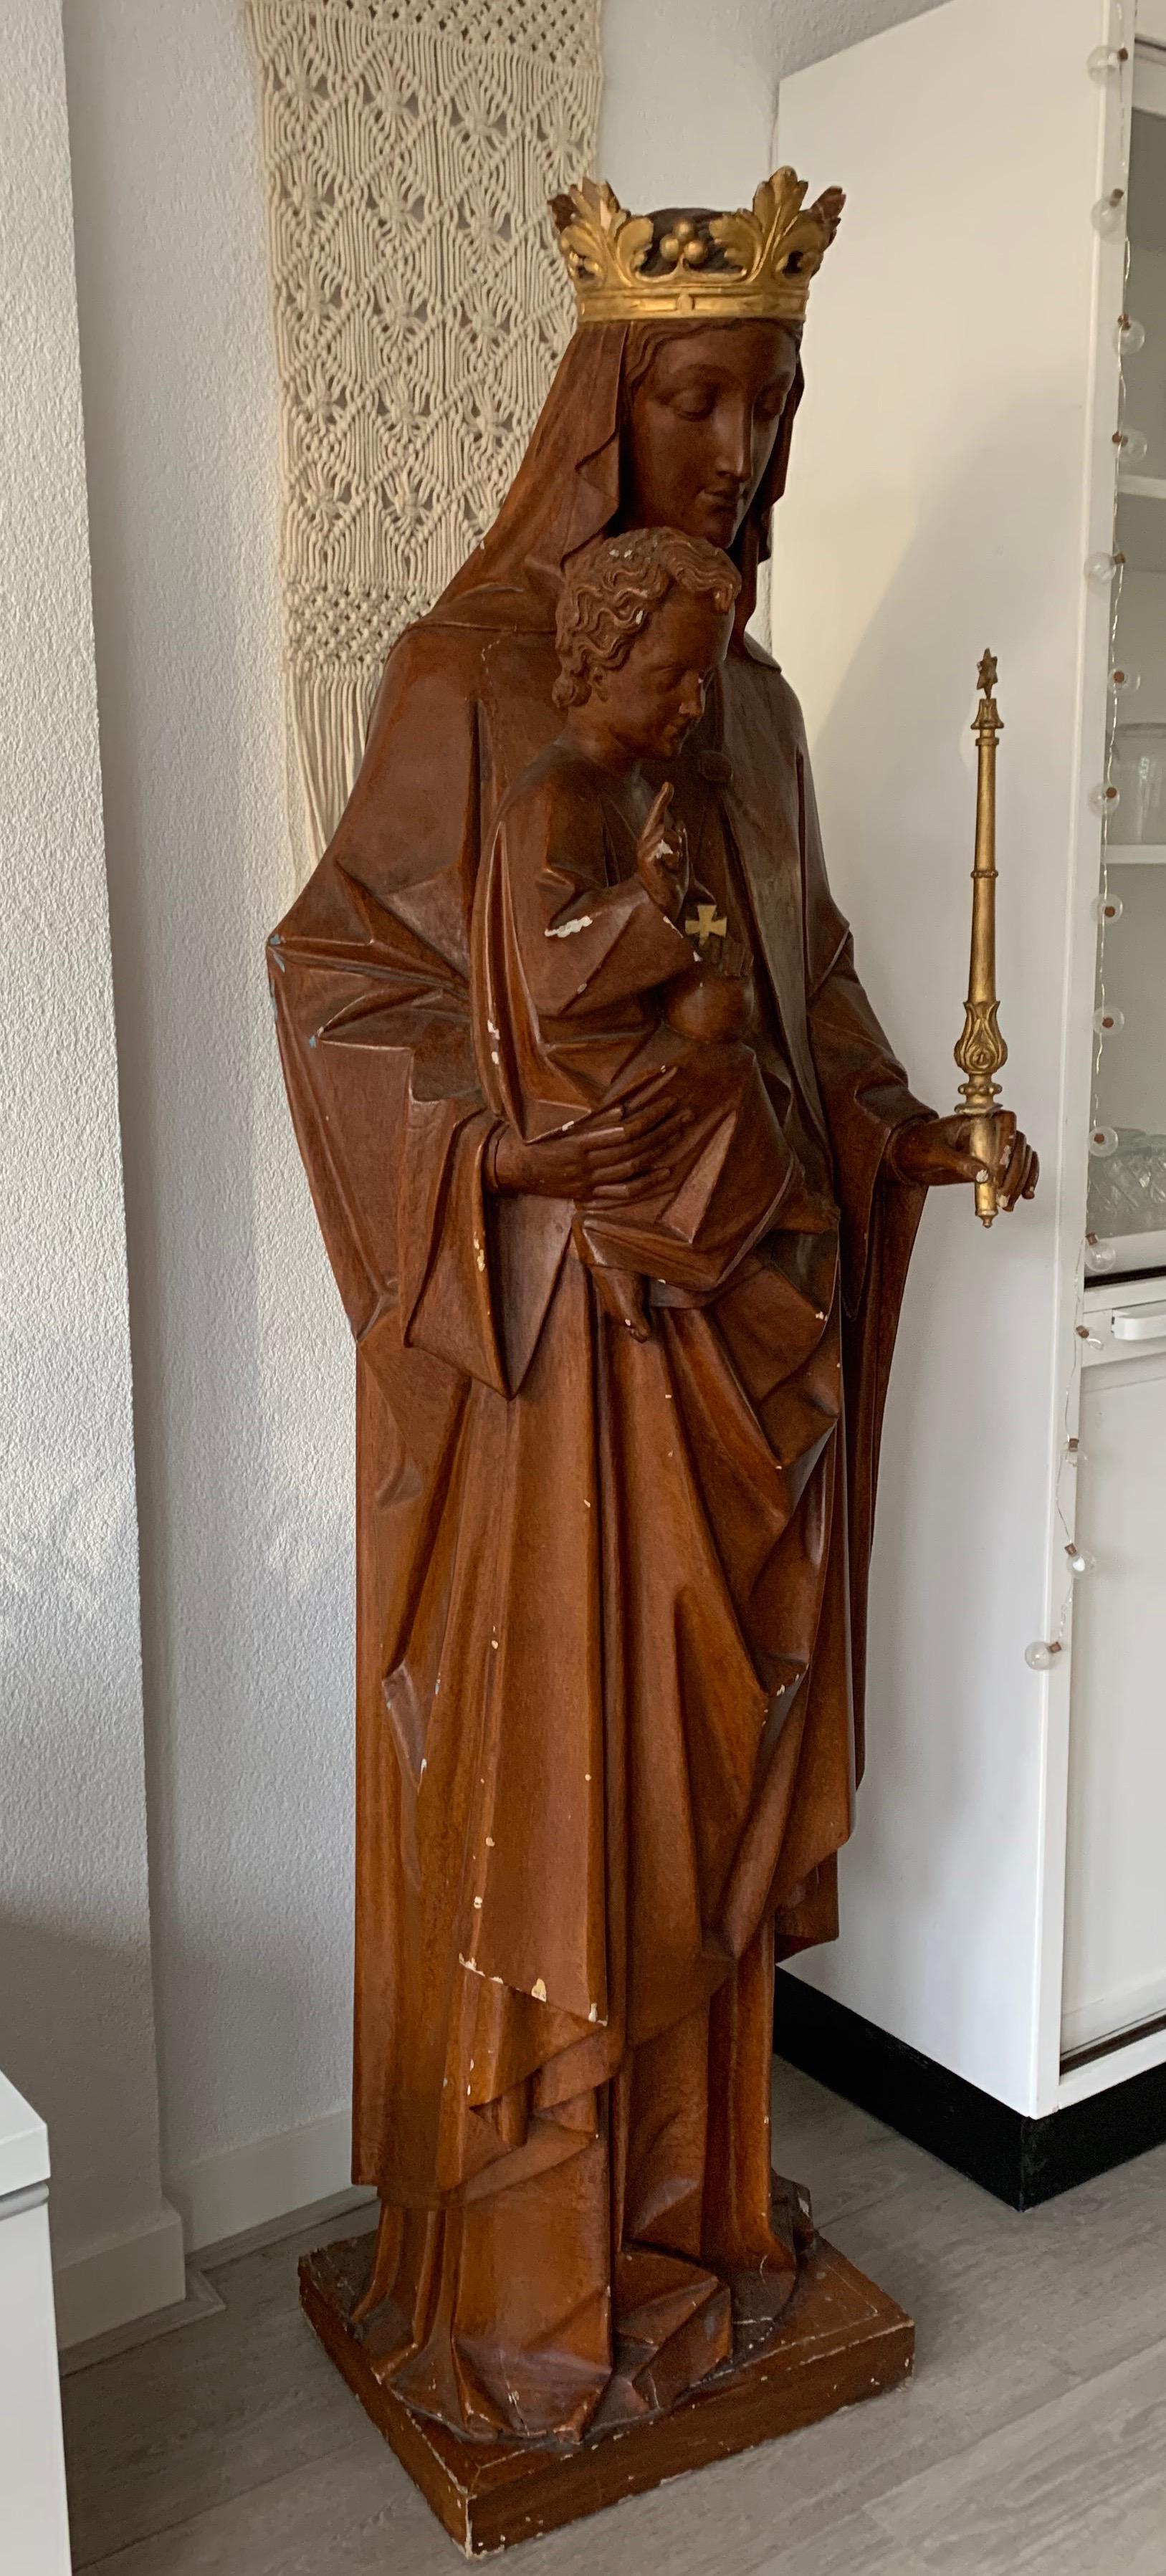 mary and jesus sculpture